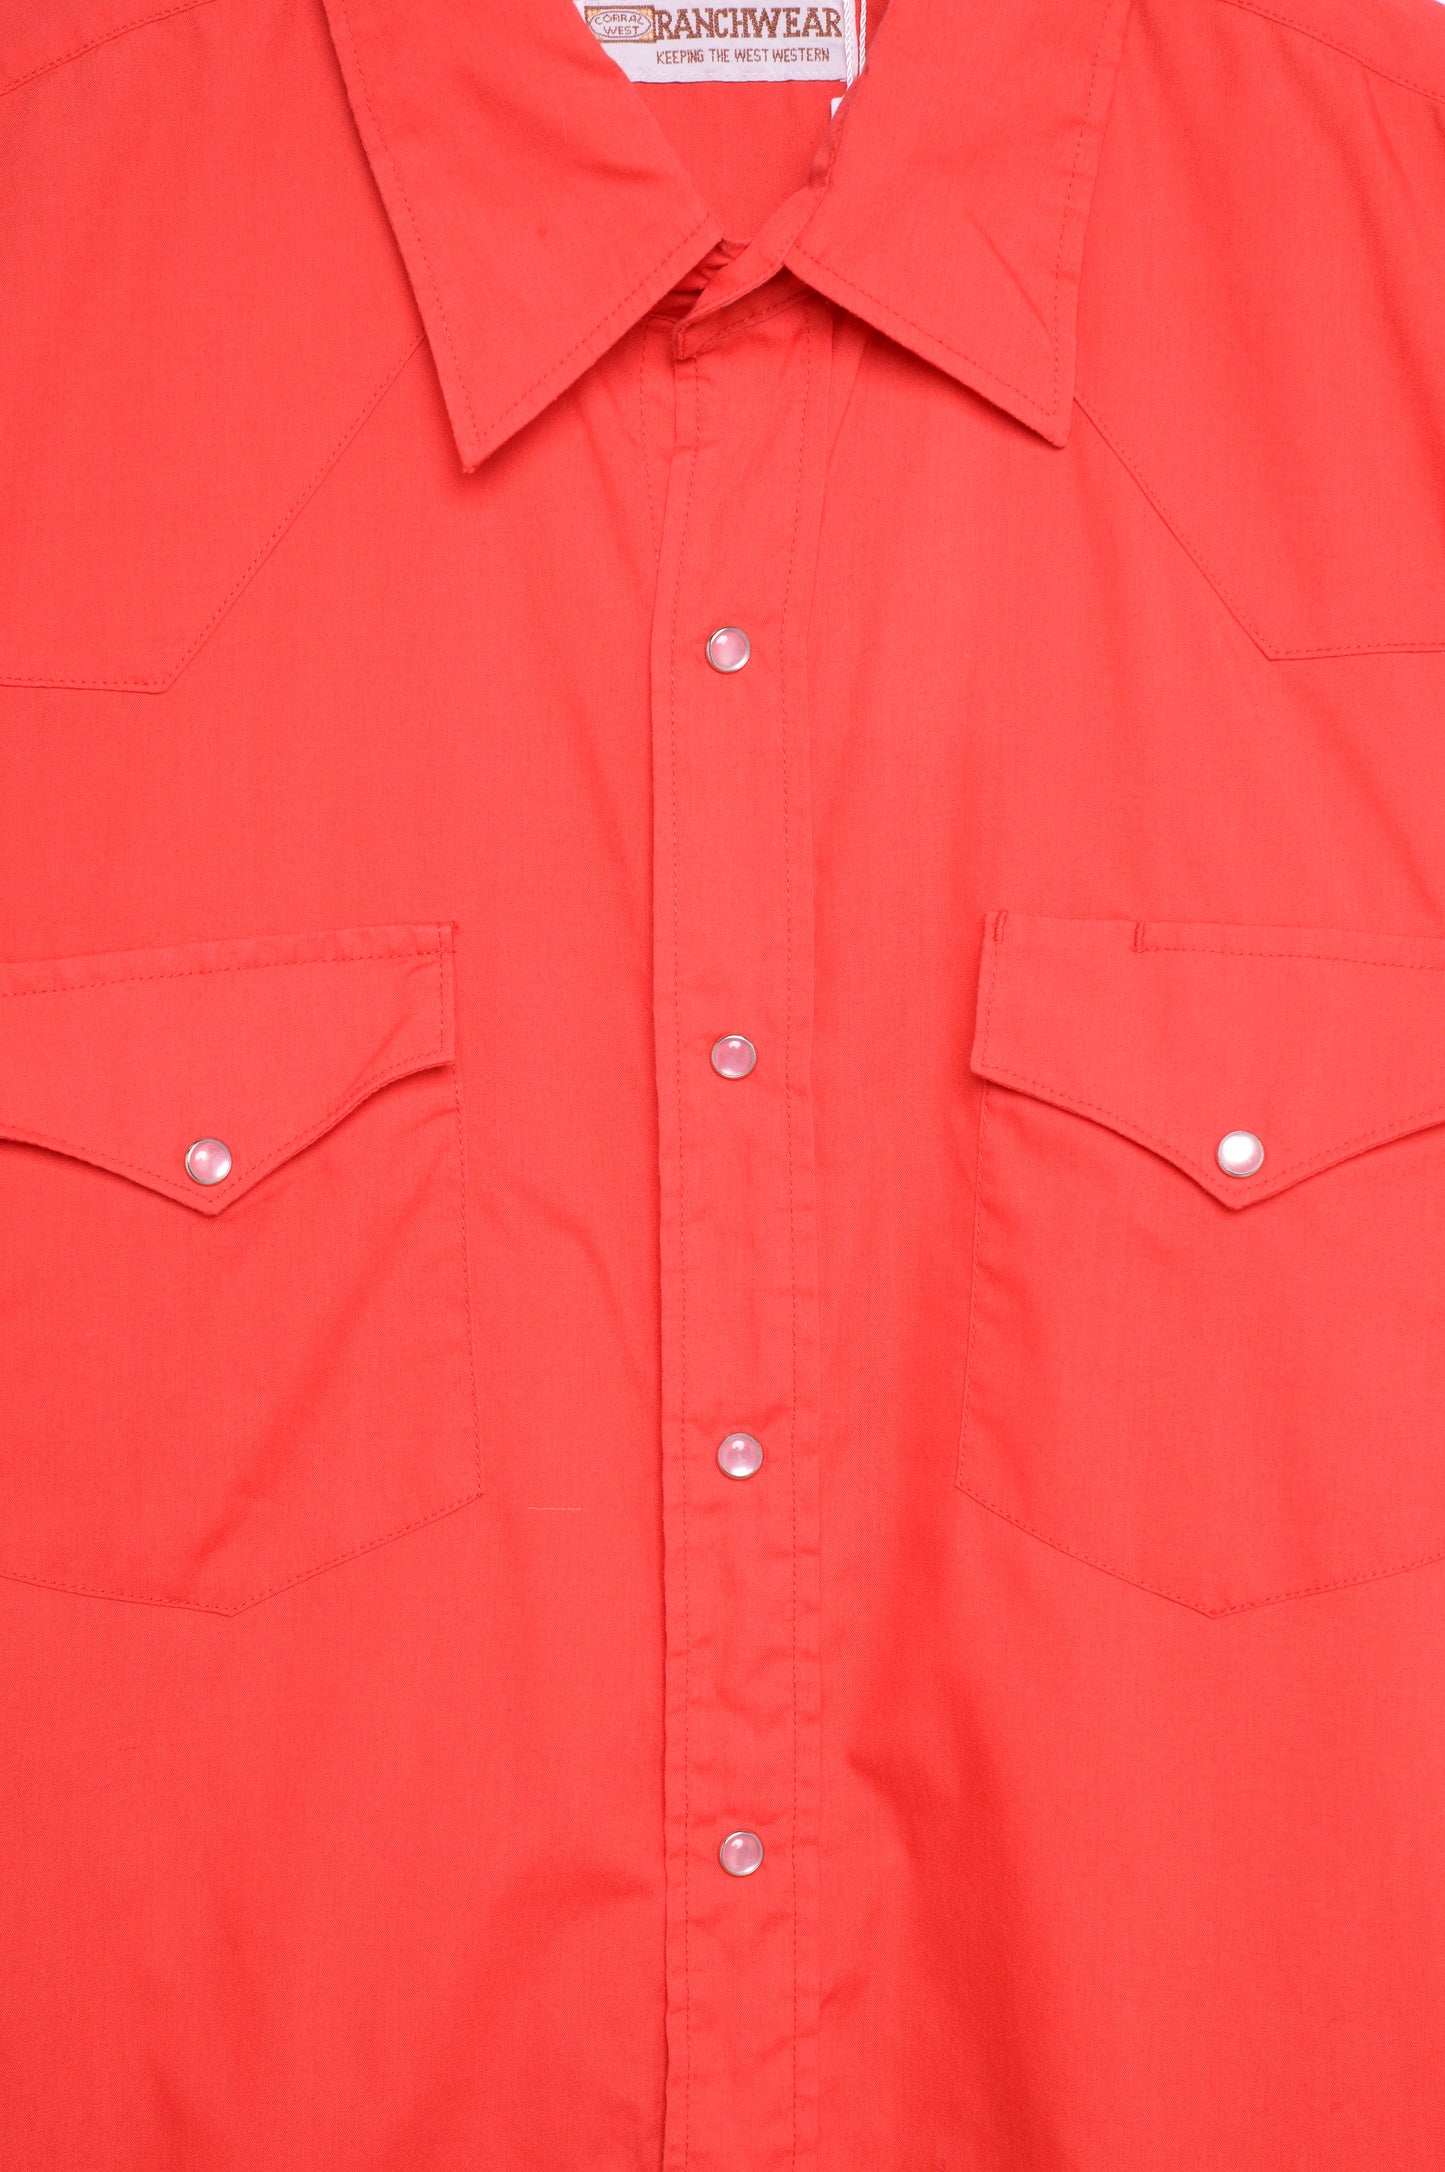 1980s Pearl Snap Button Down